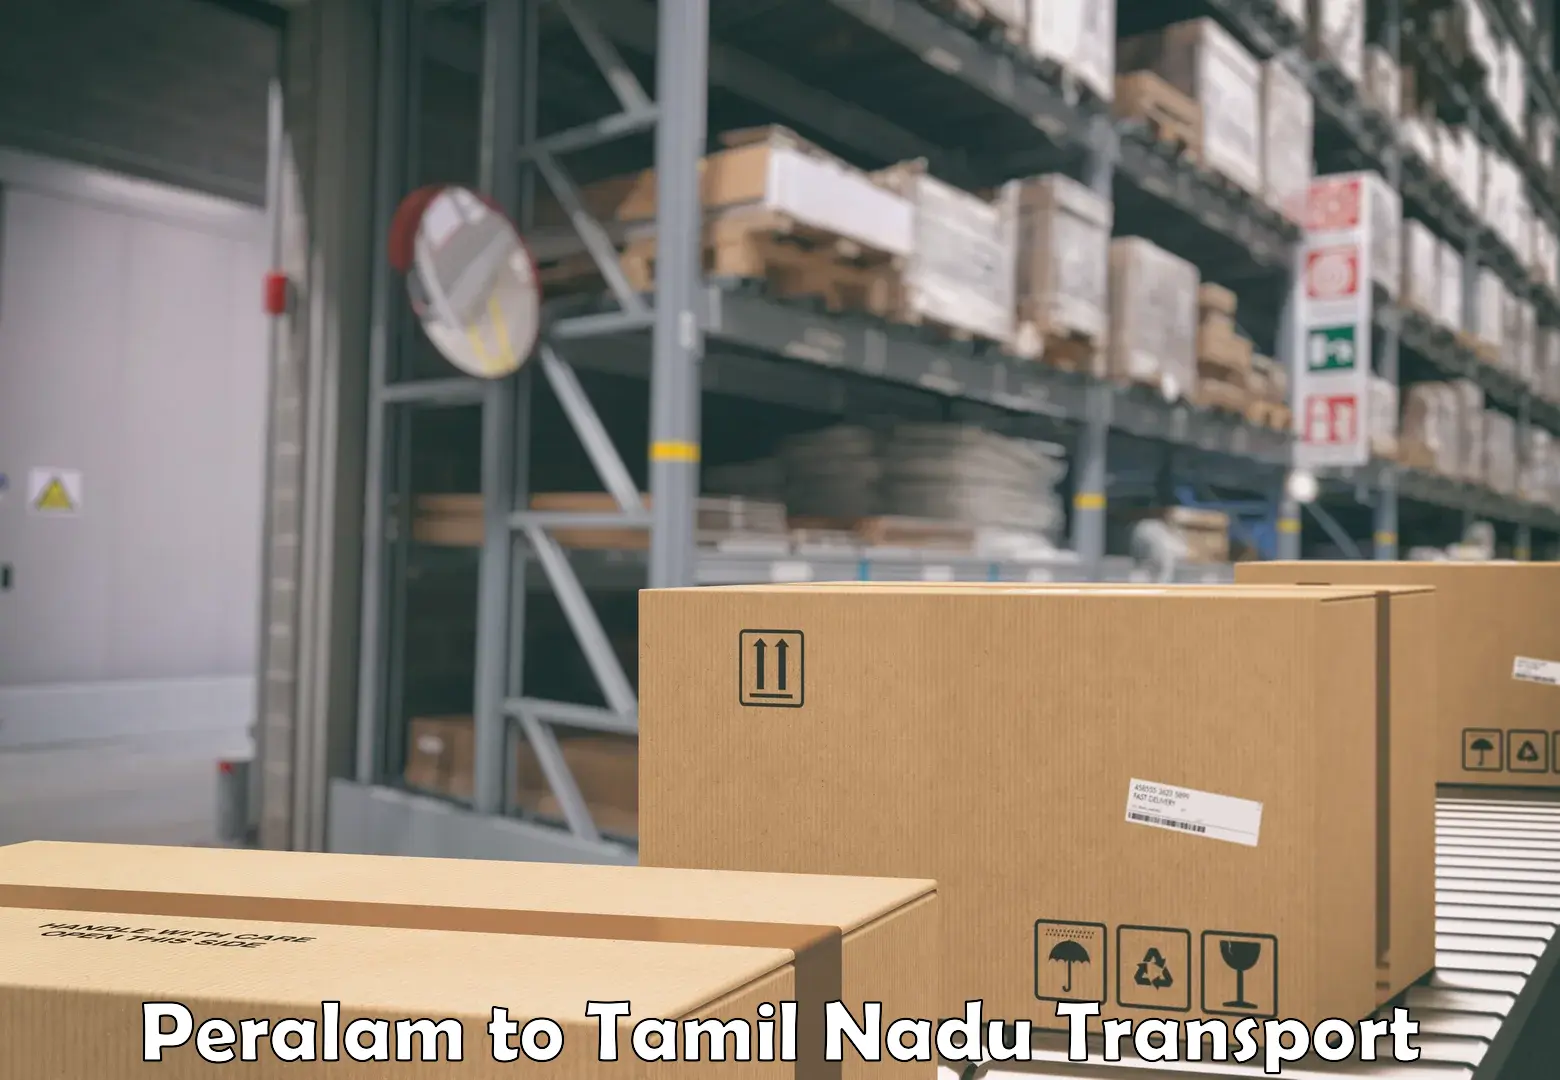 Truck transport companies in India Peralam to Chennai Port